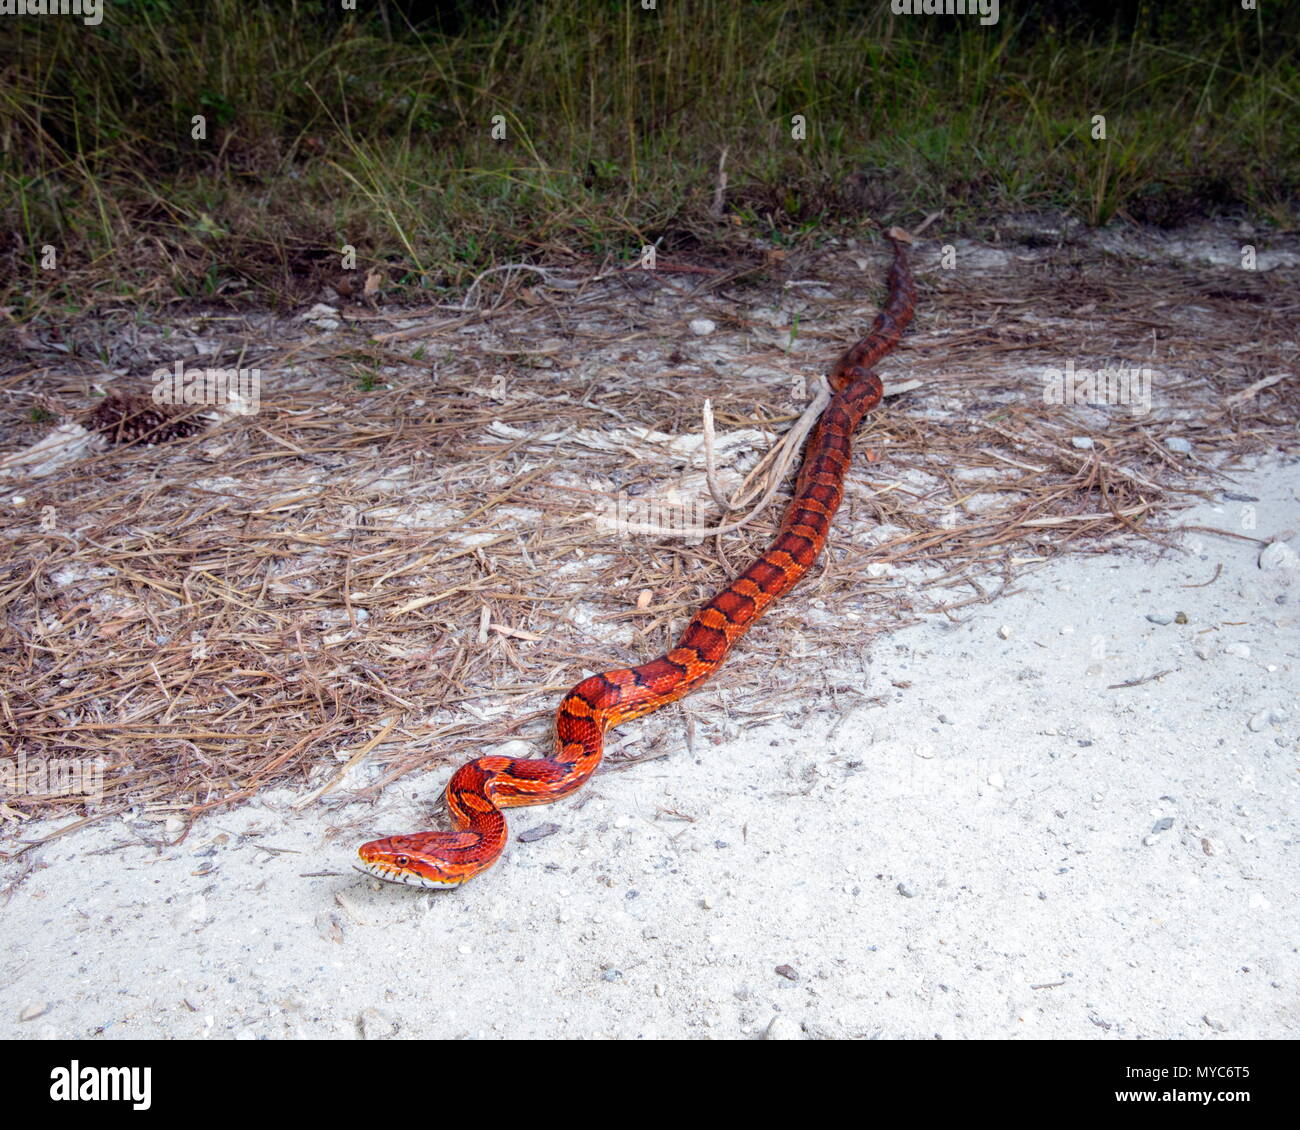 A corn snake, Pantherophis guttatus, crossing a sand road. Stock Photo